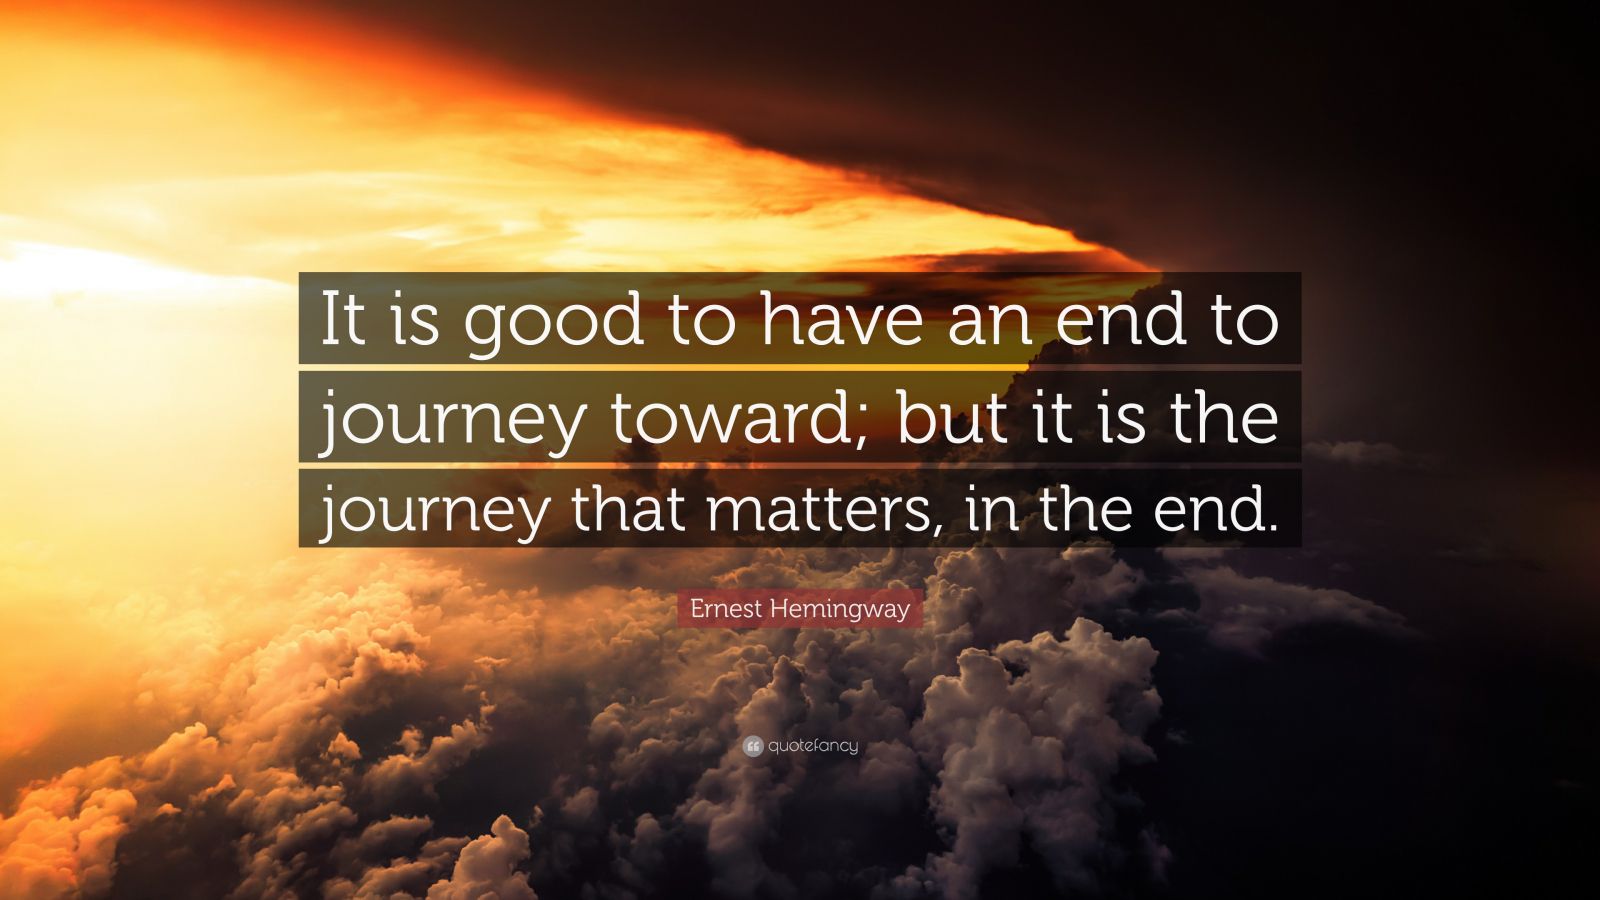 Ernest Hemingway Quote: “It is good to have an end to journey toward